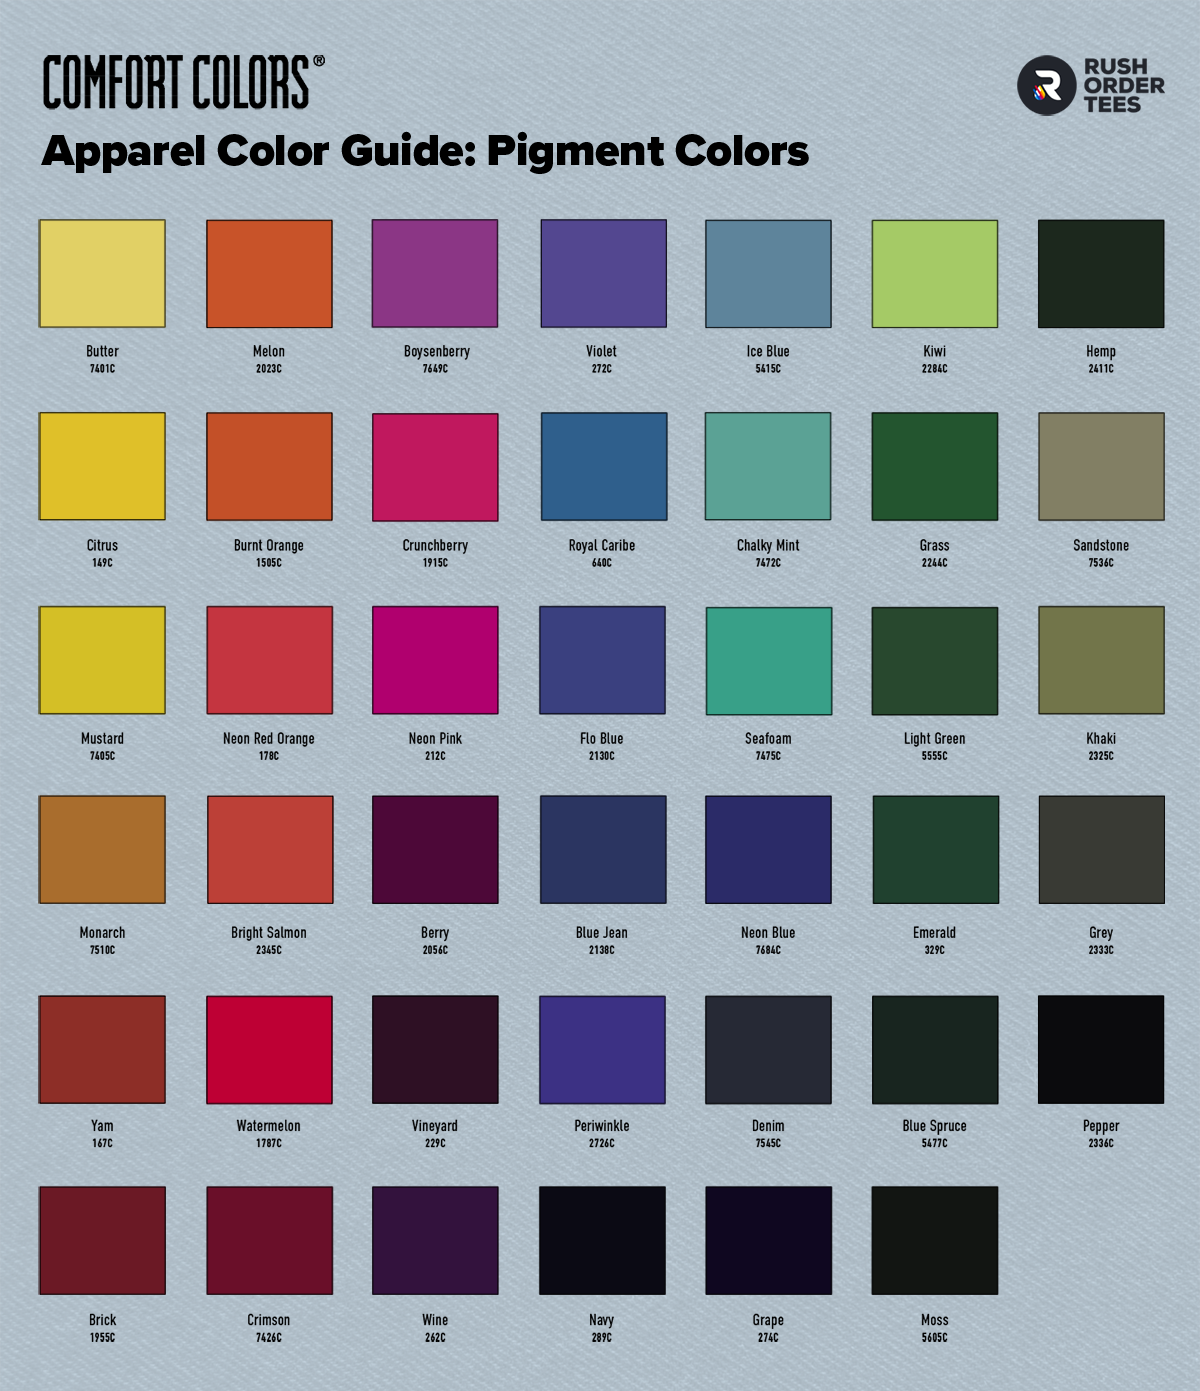 The Complete Guide to Custom Colors Shirts